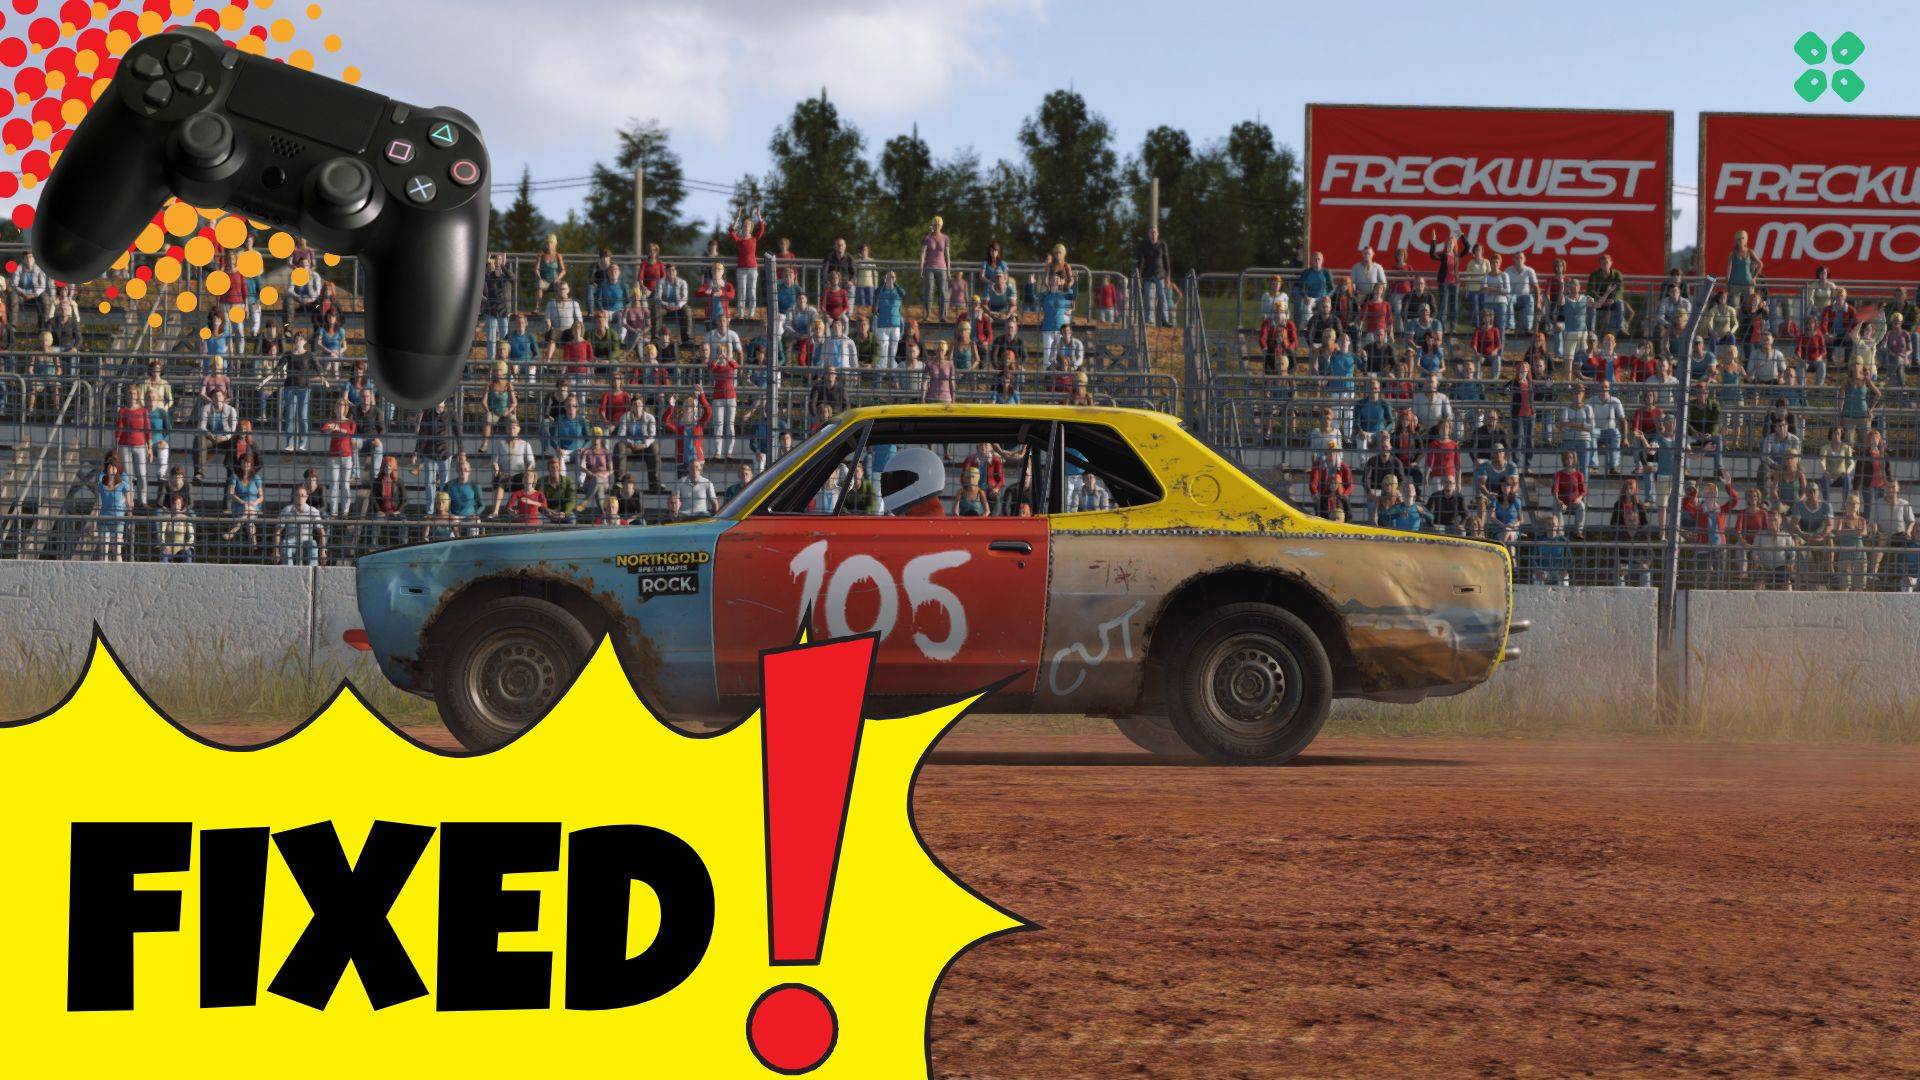 Artwork of Wreckfest and its fix of crashing by TCG